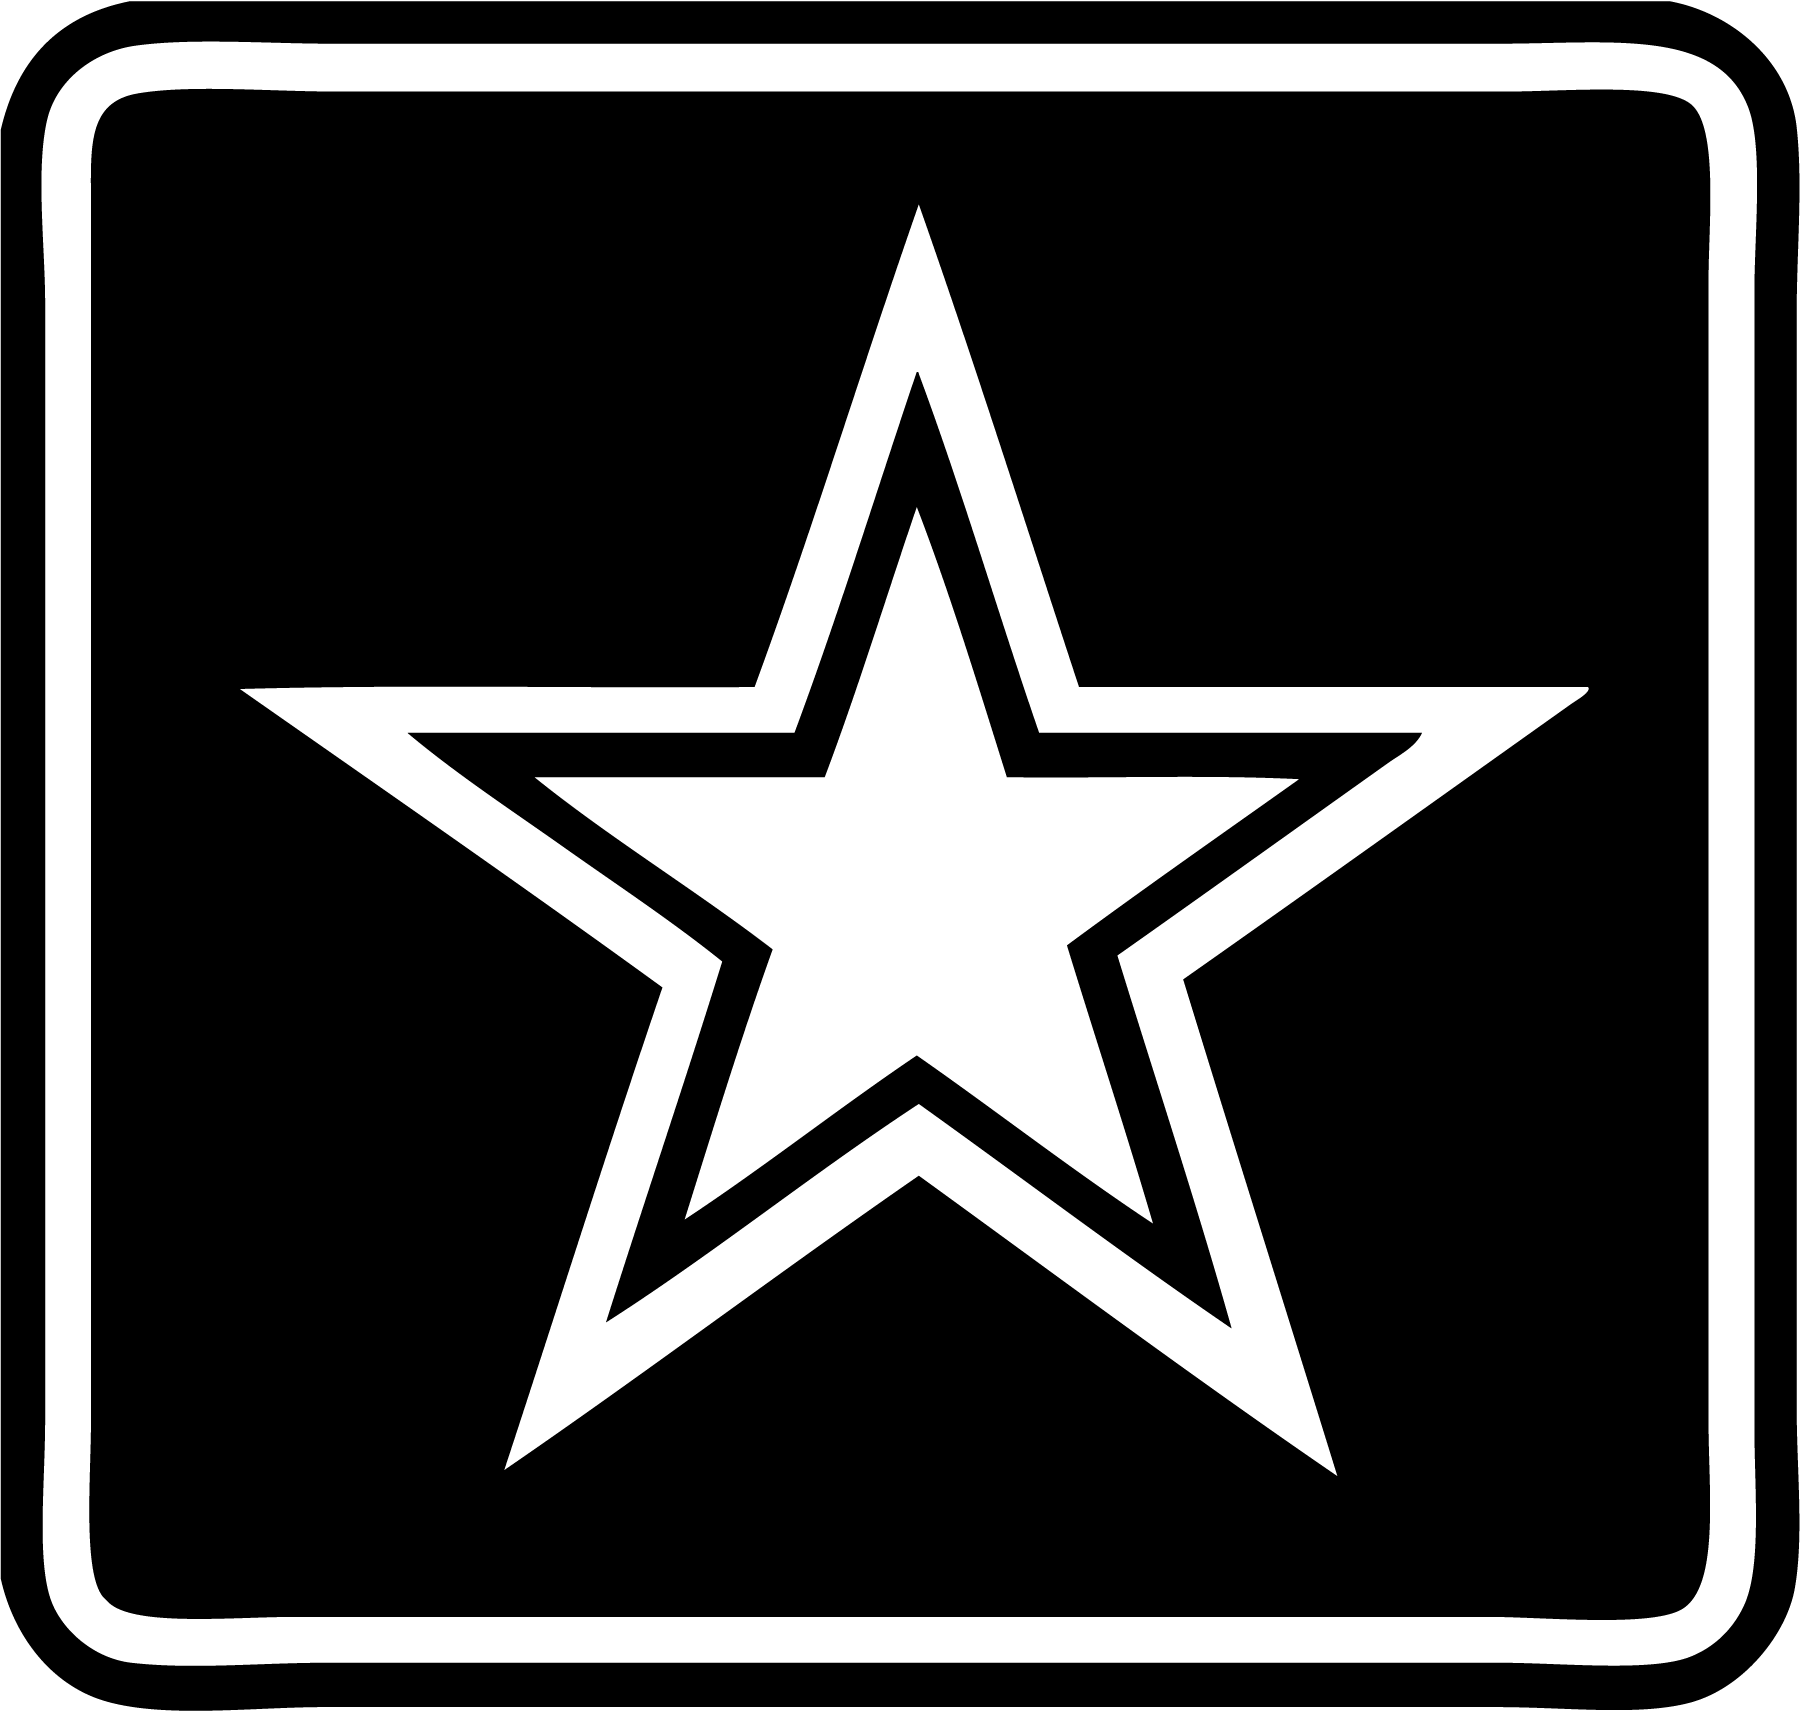 Black and White Star Logo - Naval star picture free library - RR collections